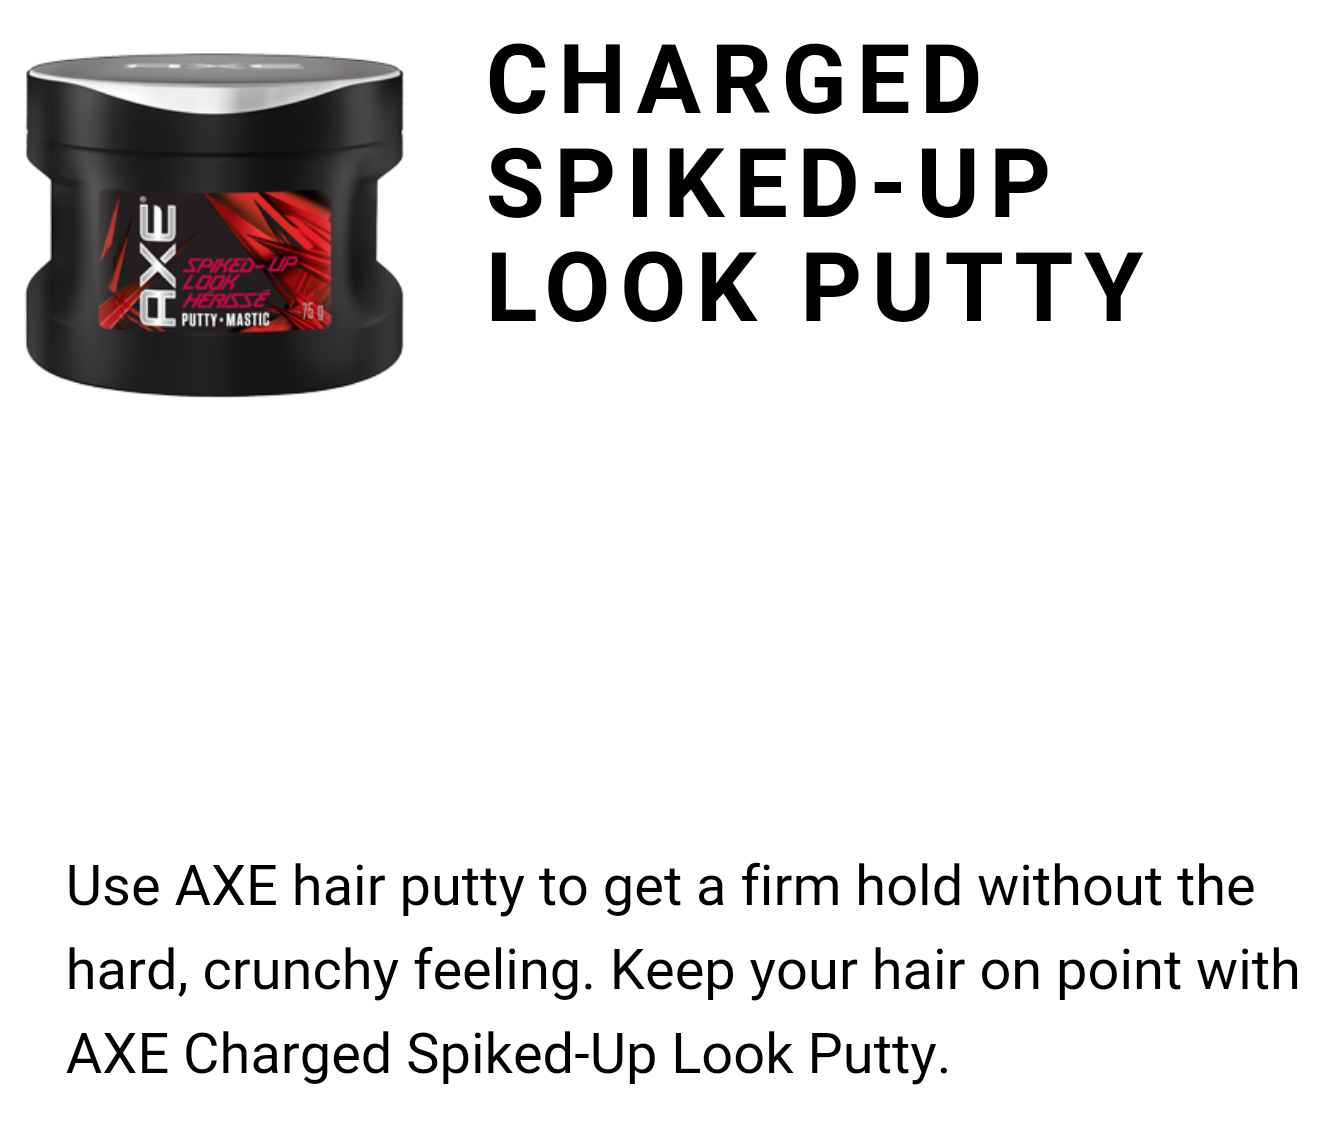 #AXEGOTSTYLE Charged Spiked-Up Look Putty